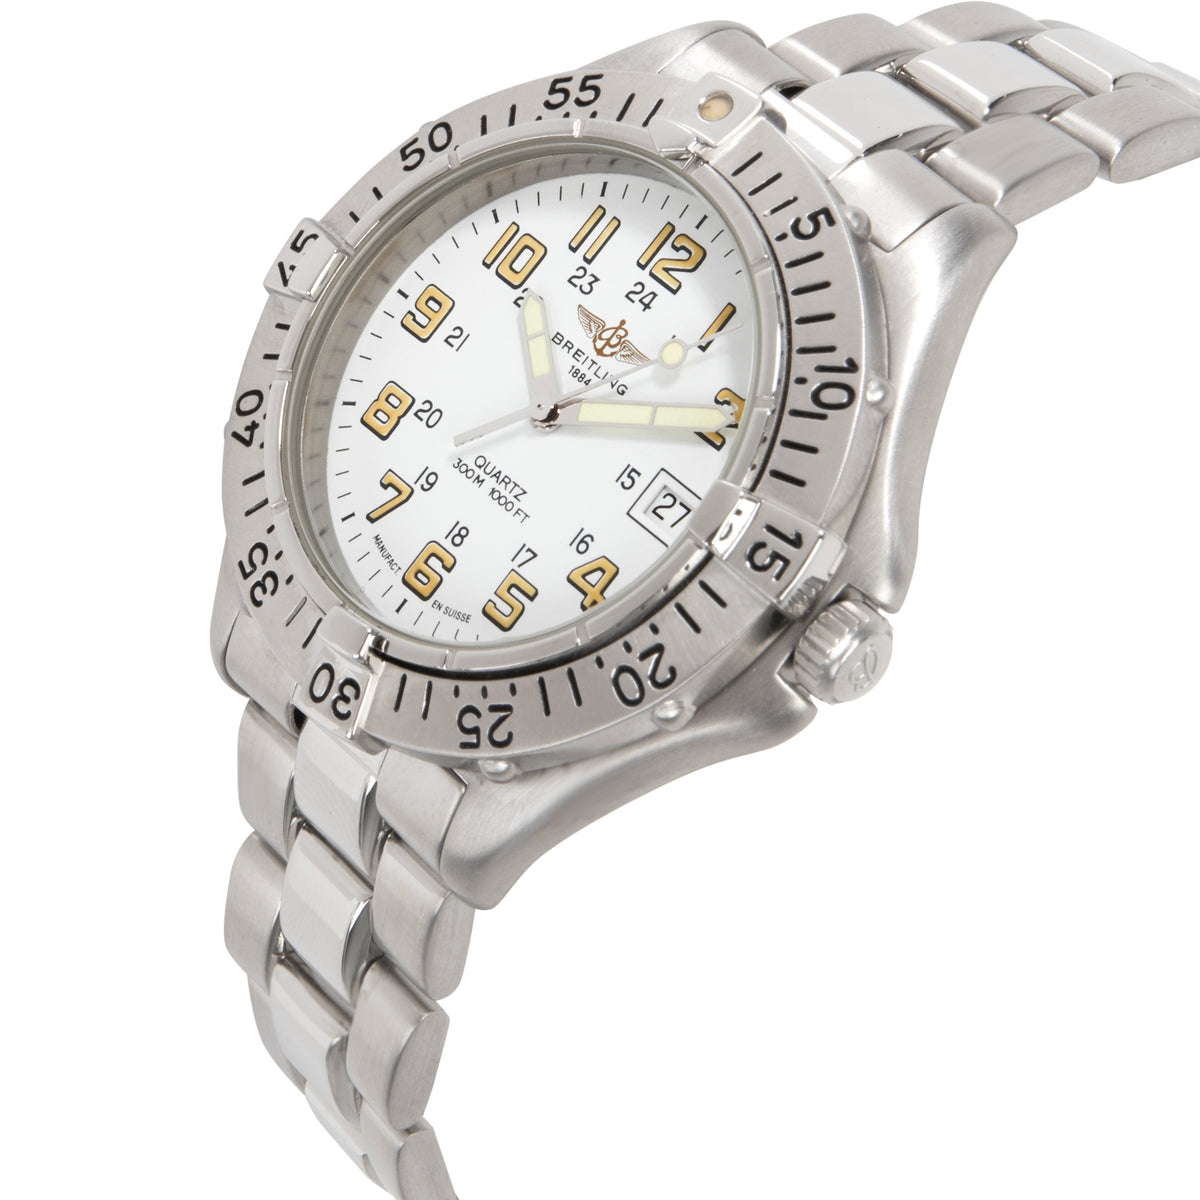 Breitling Colt A57035 Men's Watch in  Stainless Steel